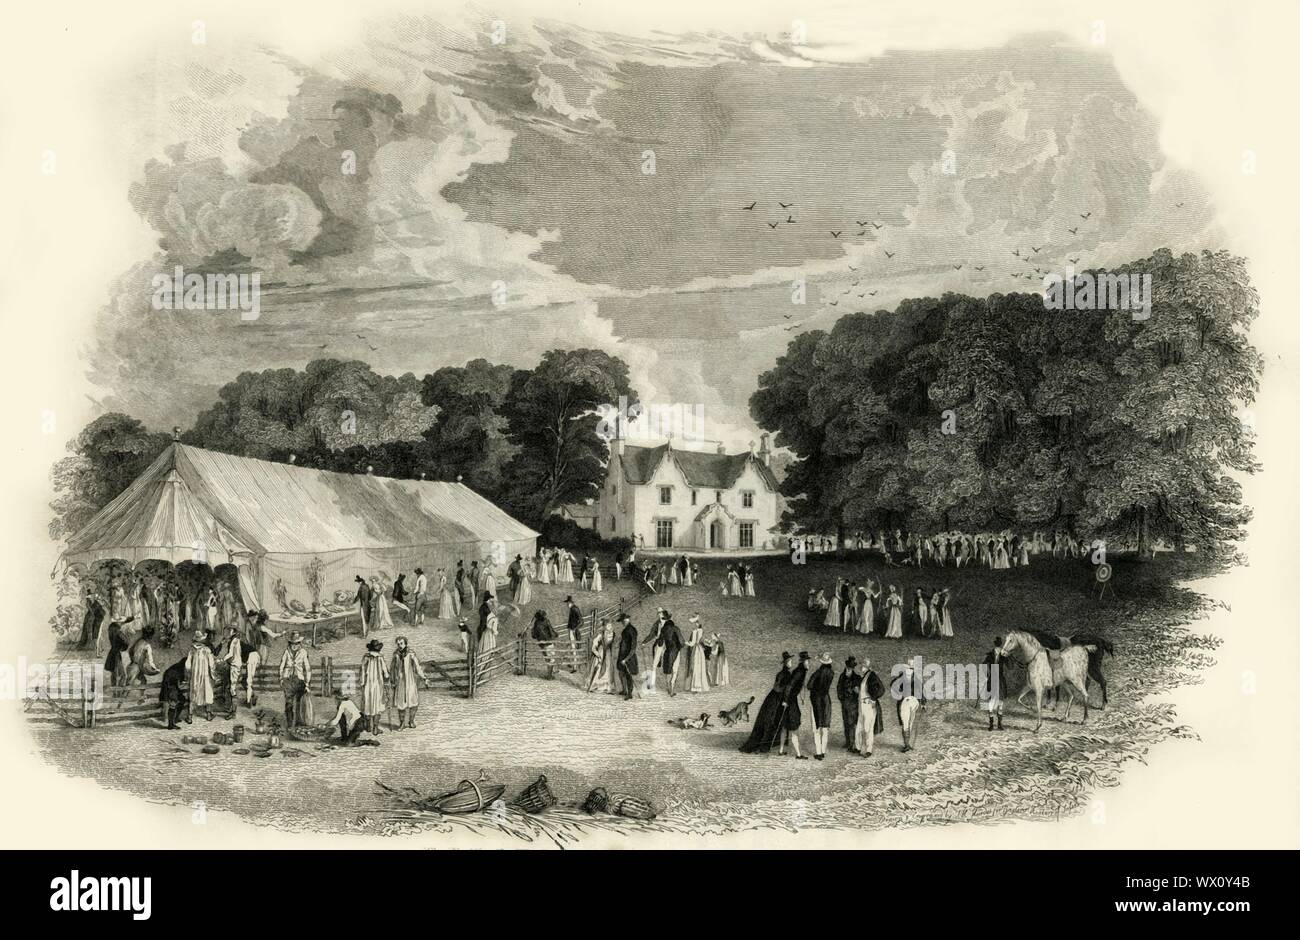 'Beechlands, Newick', 1835. Village fair in the grounds of Grade II listed Beechlands House in Newick, Sussex, England. Engraving by John Henry Hurdis. From &quot;The History, Antiquities, and Topography of the County of Sussex, Volume the First&quot;, by Thomas Walker Horsfield, F.S.A. [Baxter, Sussex Press, Lewes; Messrs. Nichols and Son, London, (1835)] Stock Photo